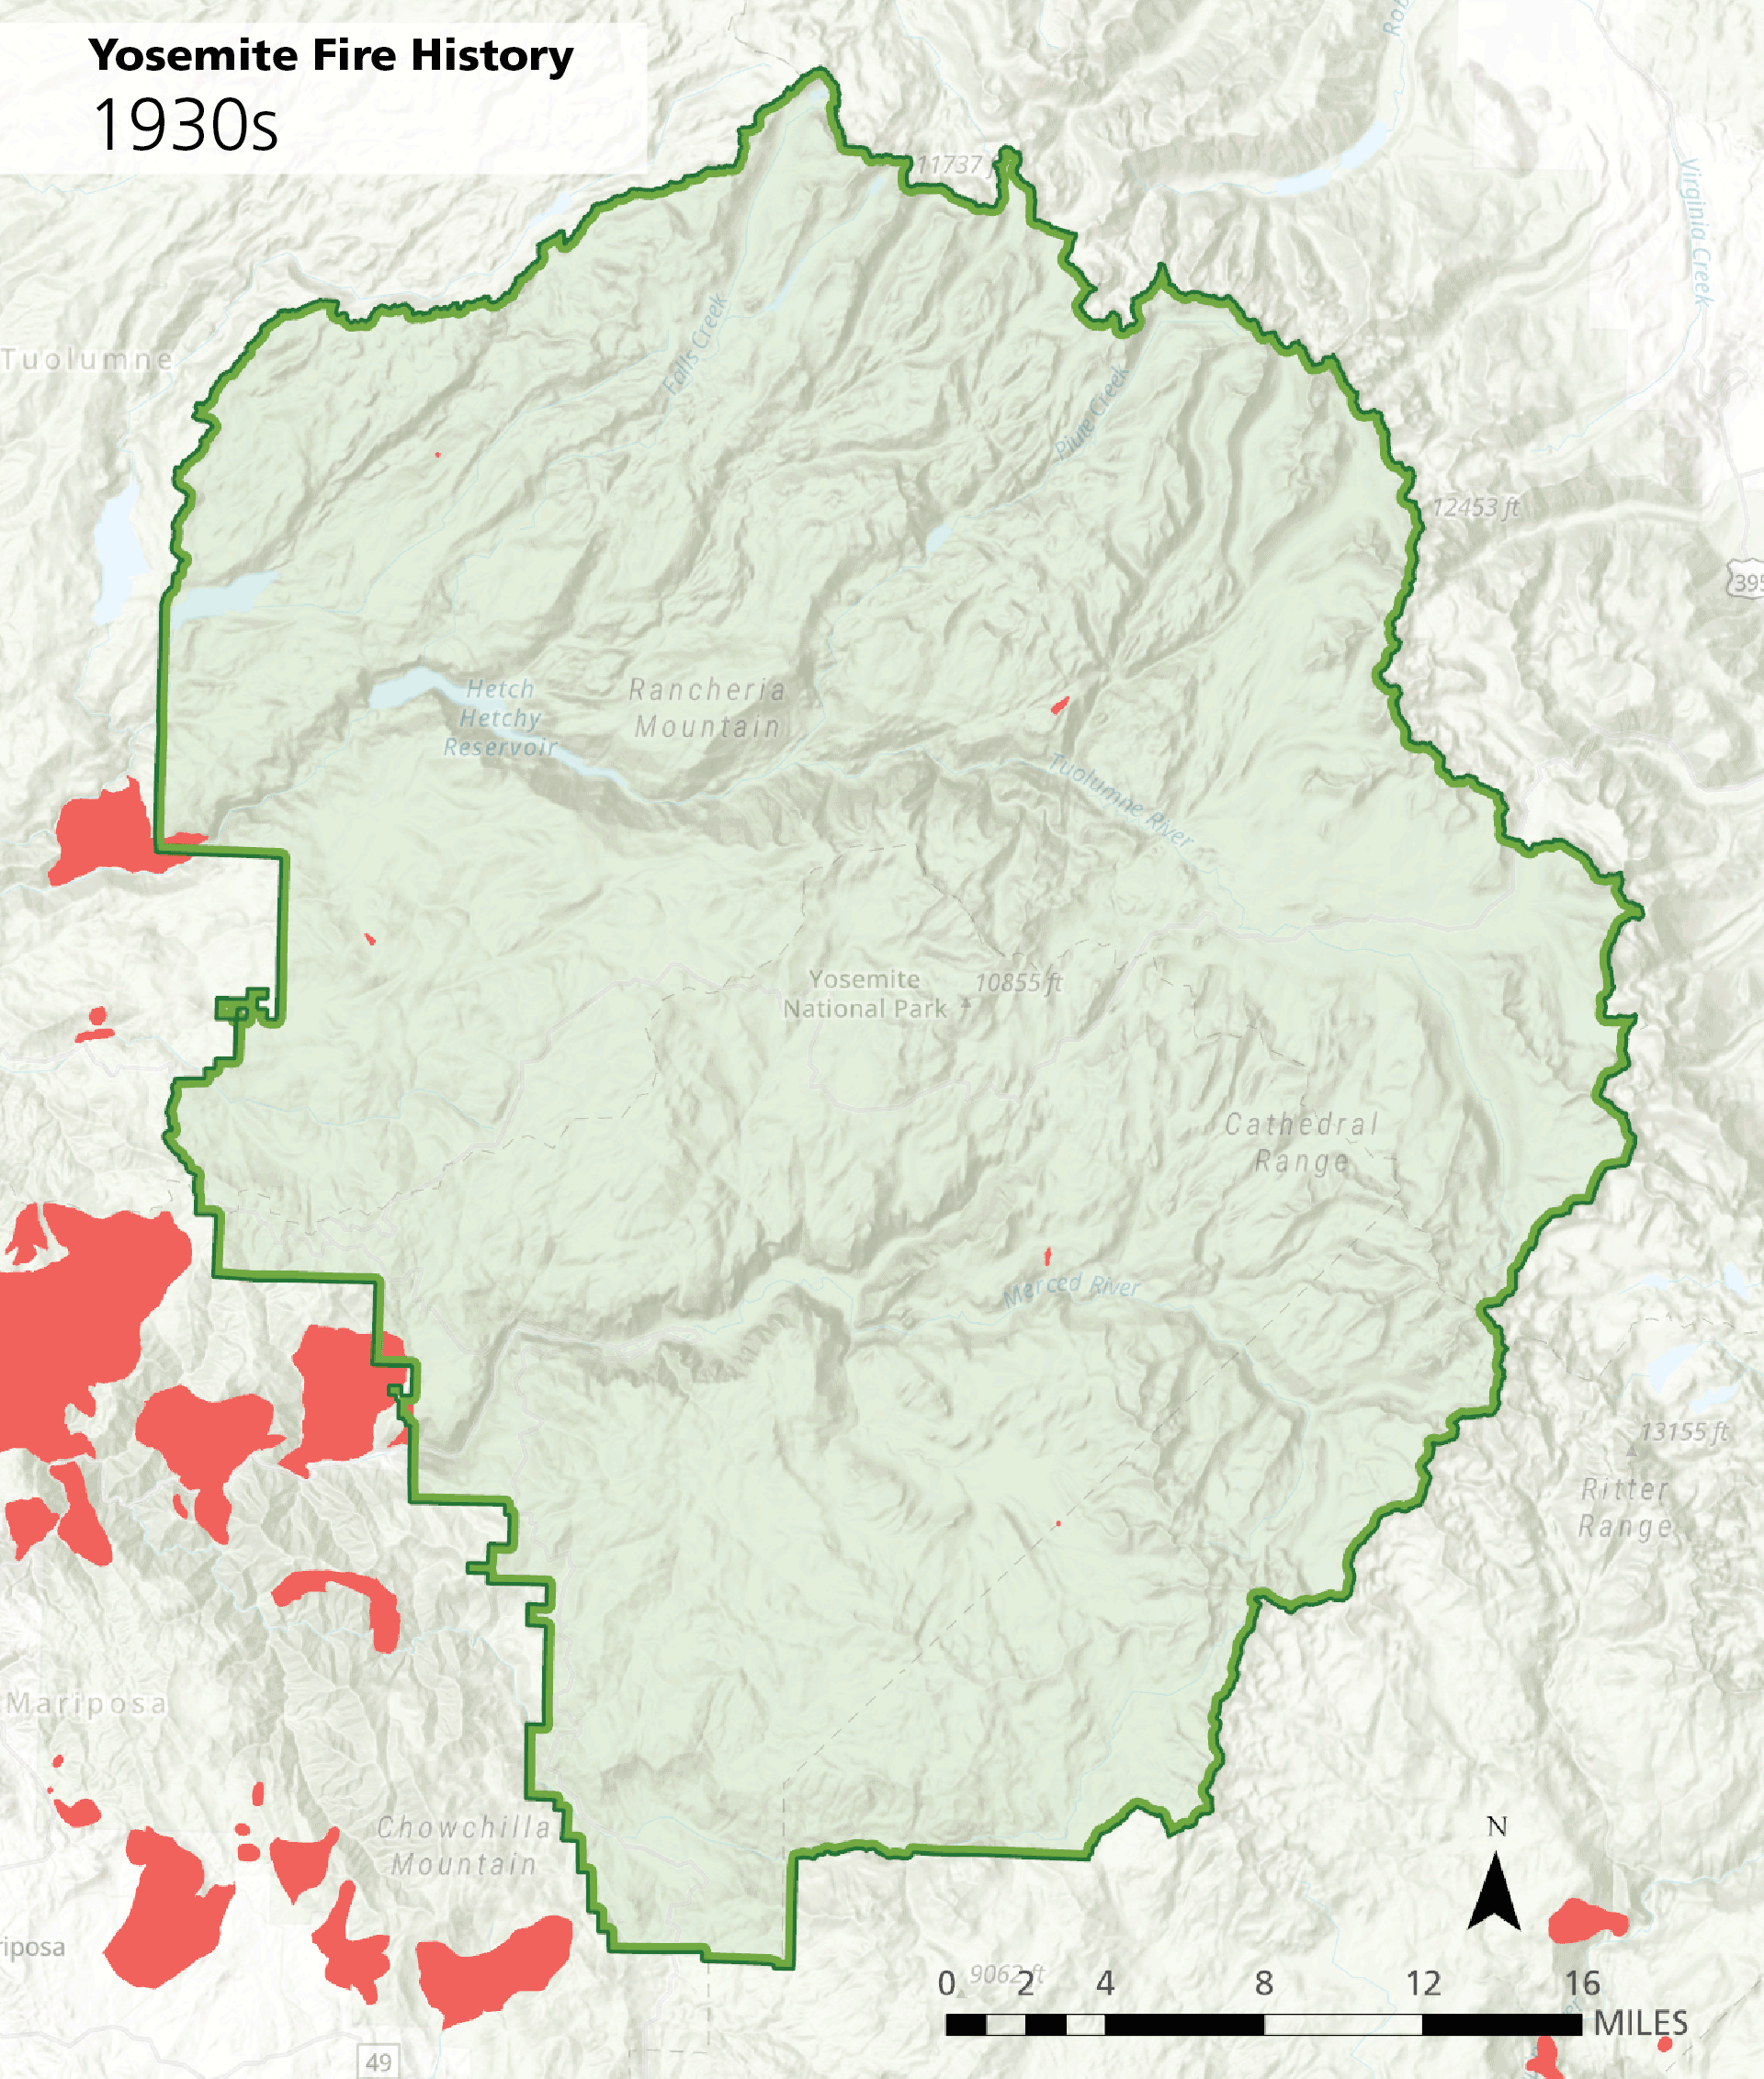 Animated map of Yosemite shows fire scars growing larger by decade.